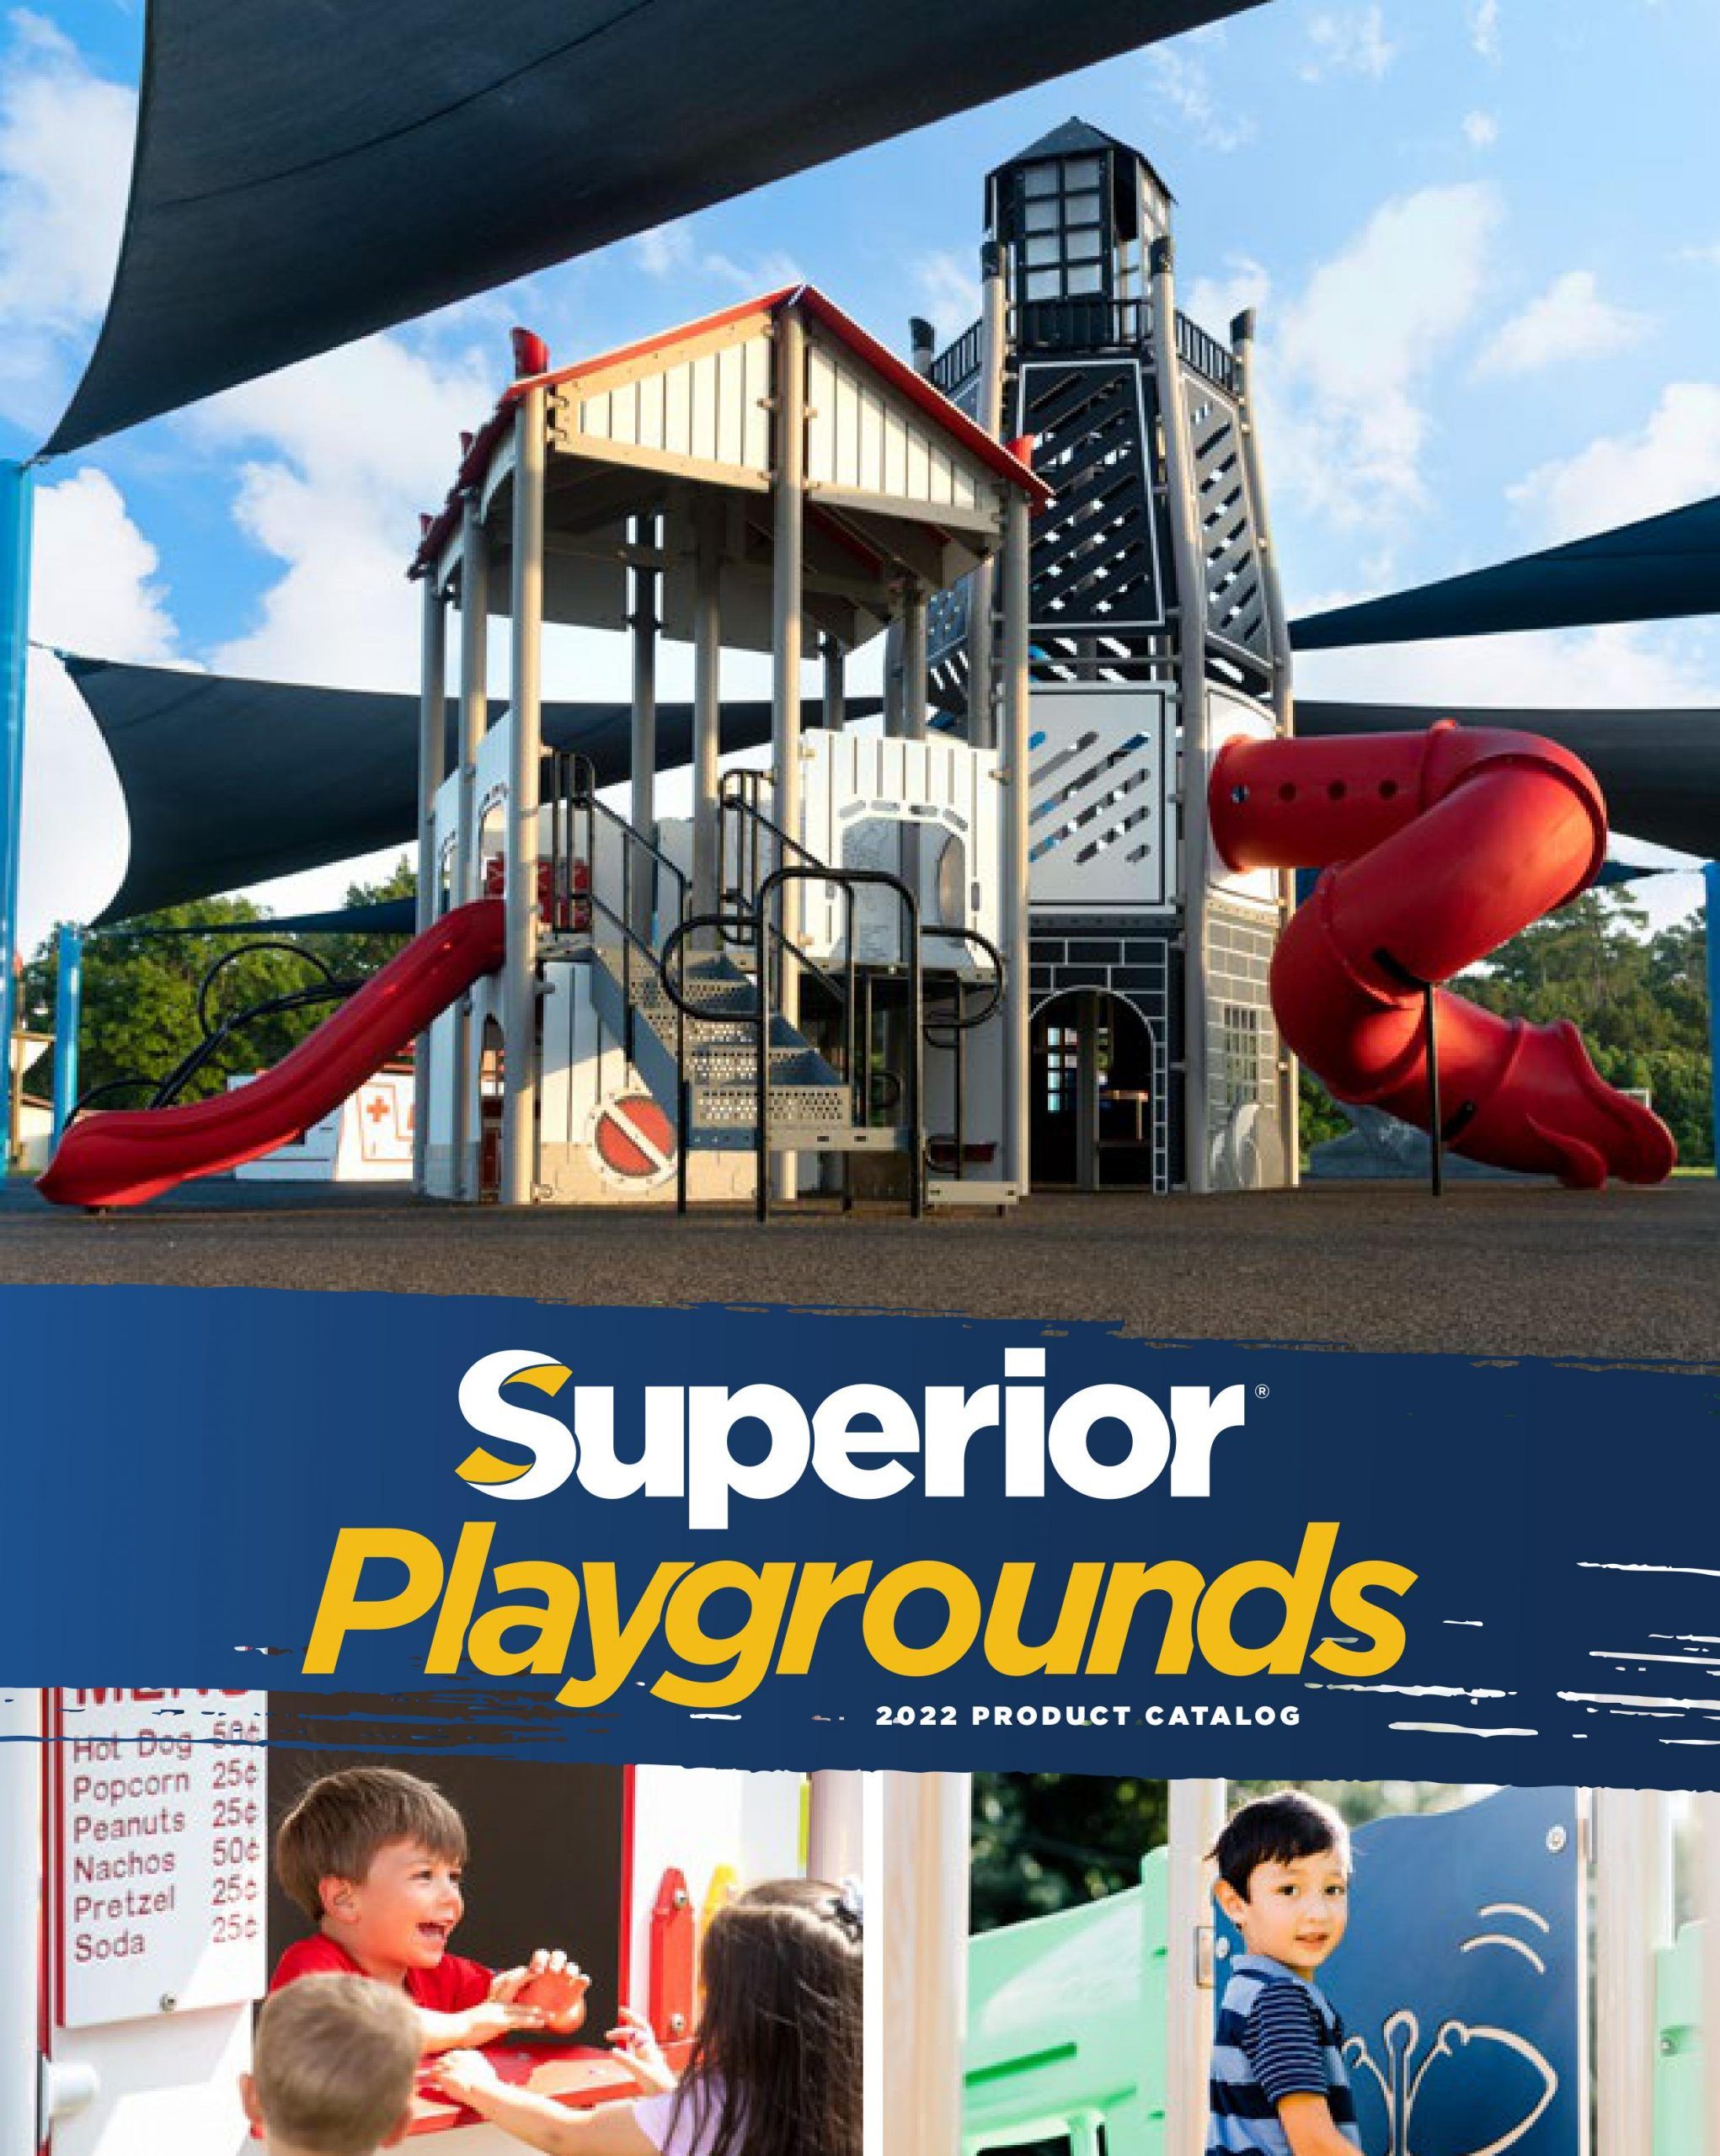 Commercial Play Equipment